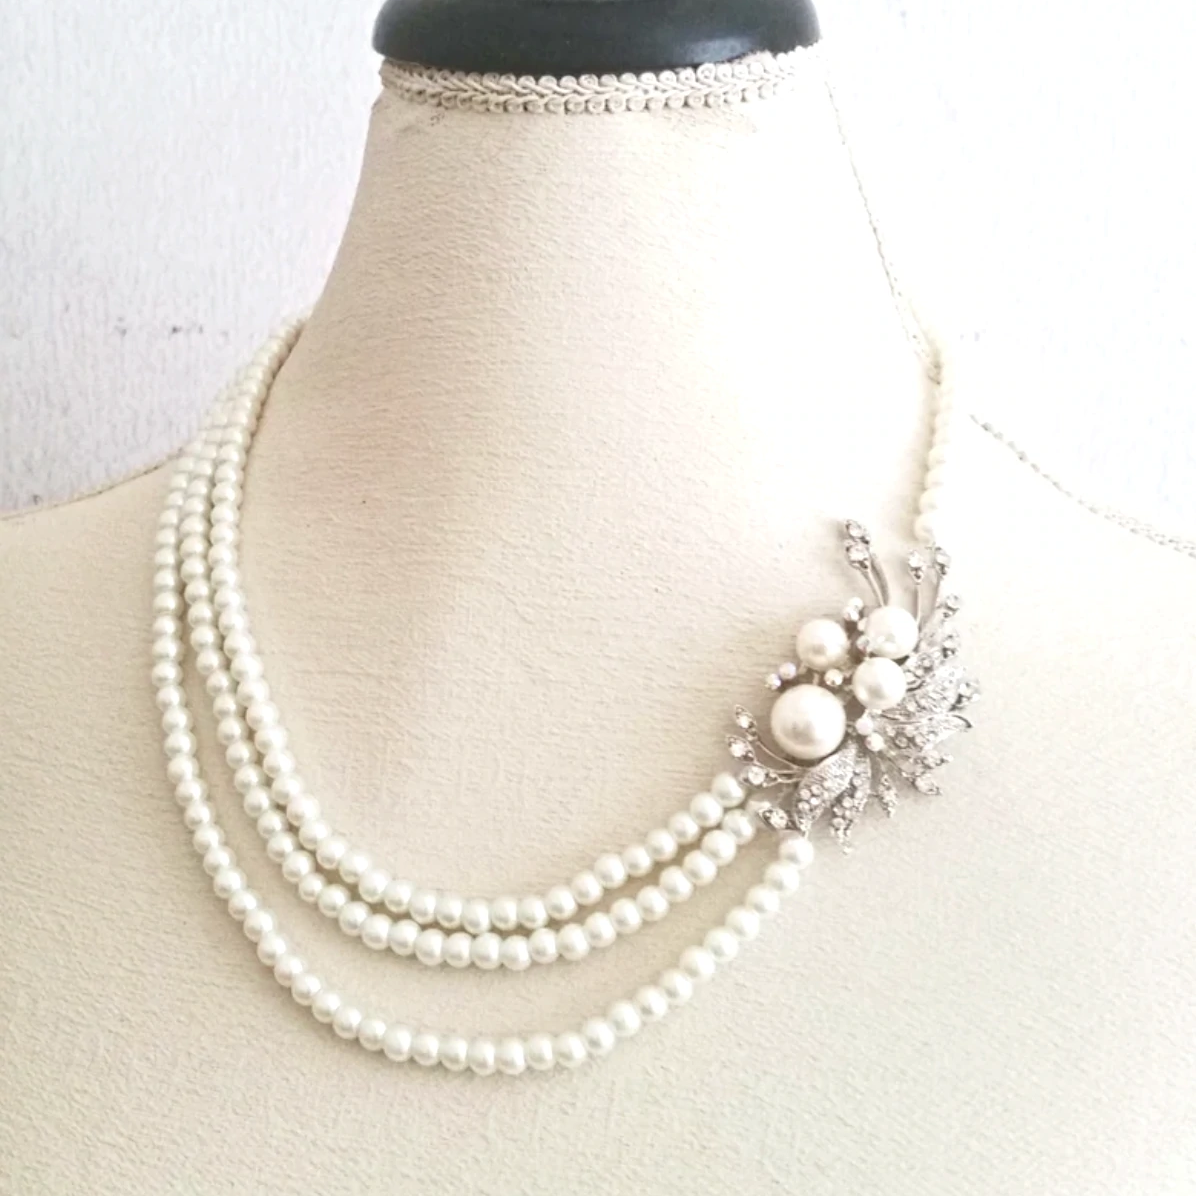 vintage style wedding necklace pearl